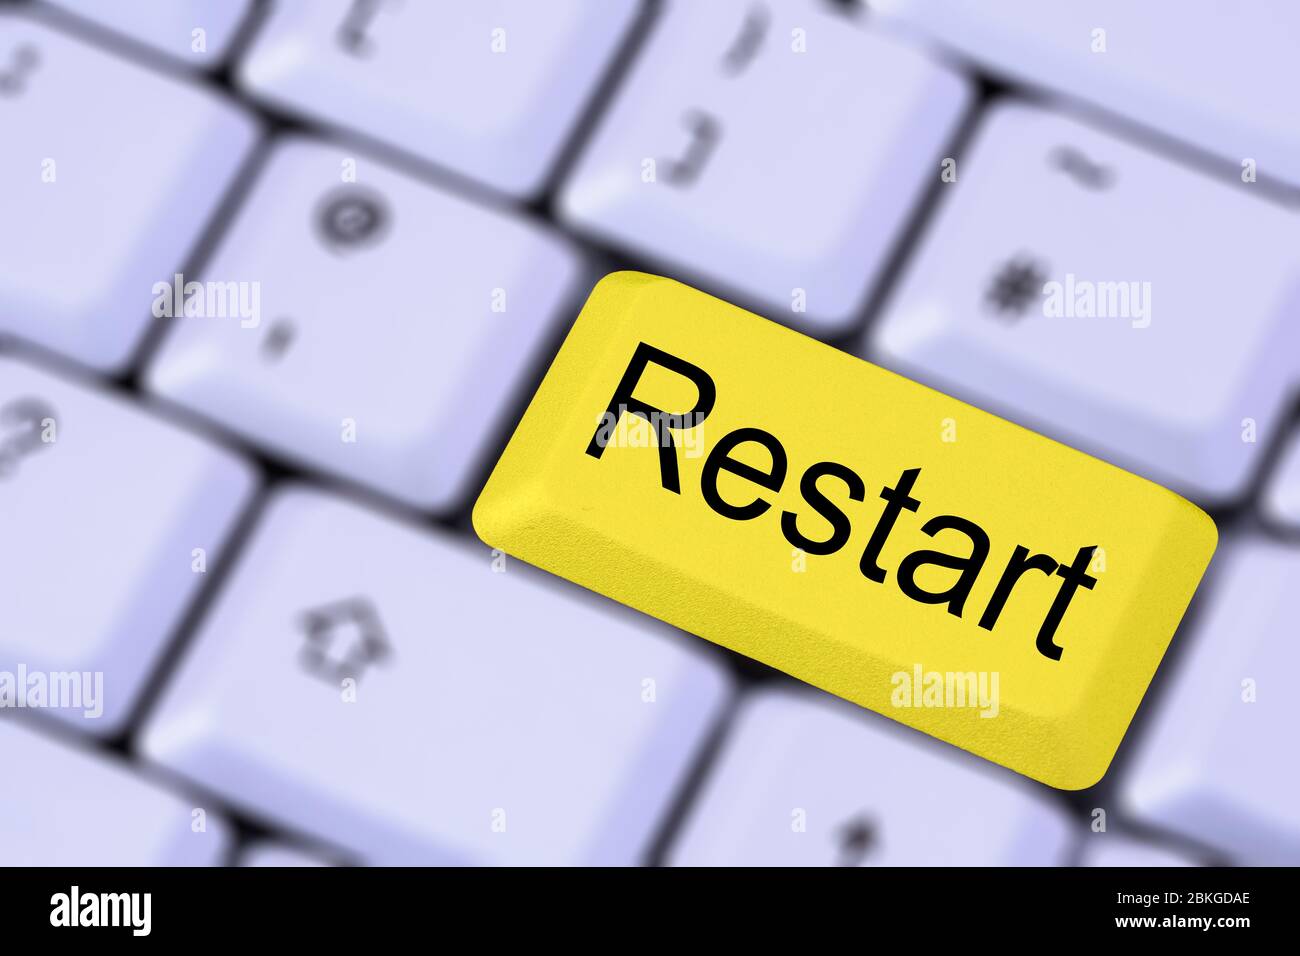 A keyboard with the word RESTART on a yellow enter key on a blurred background of keys. England, UK, Britain Stock Photo